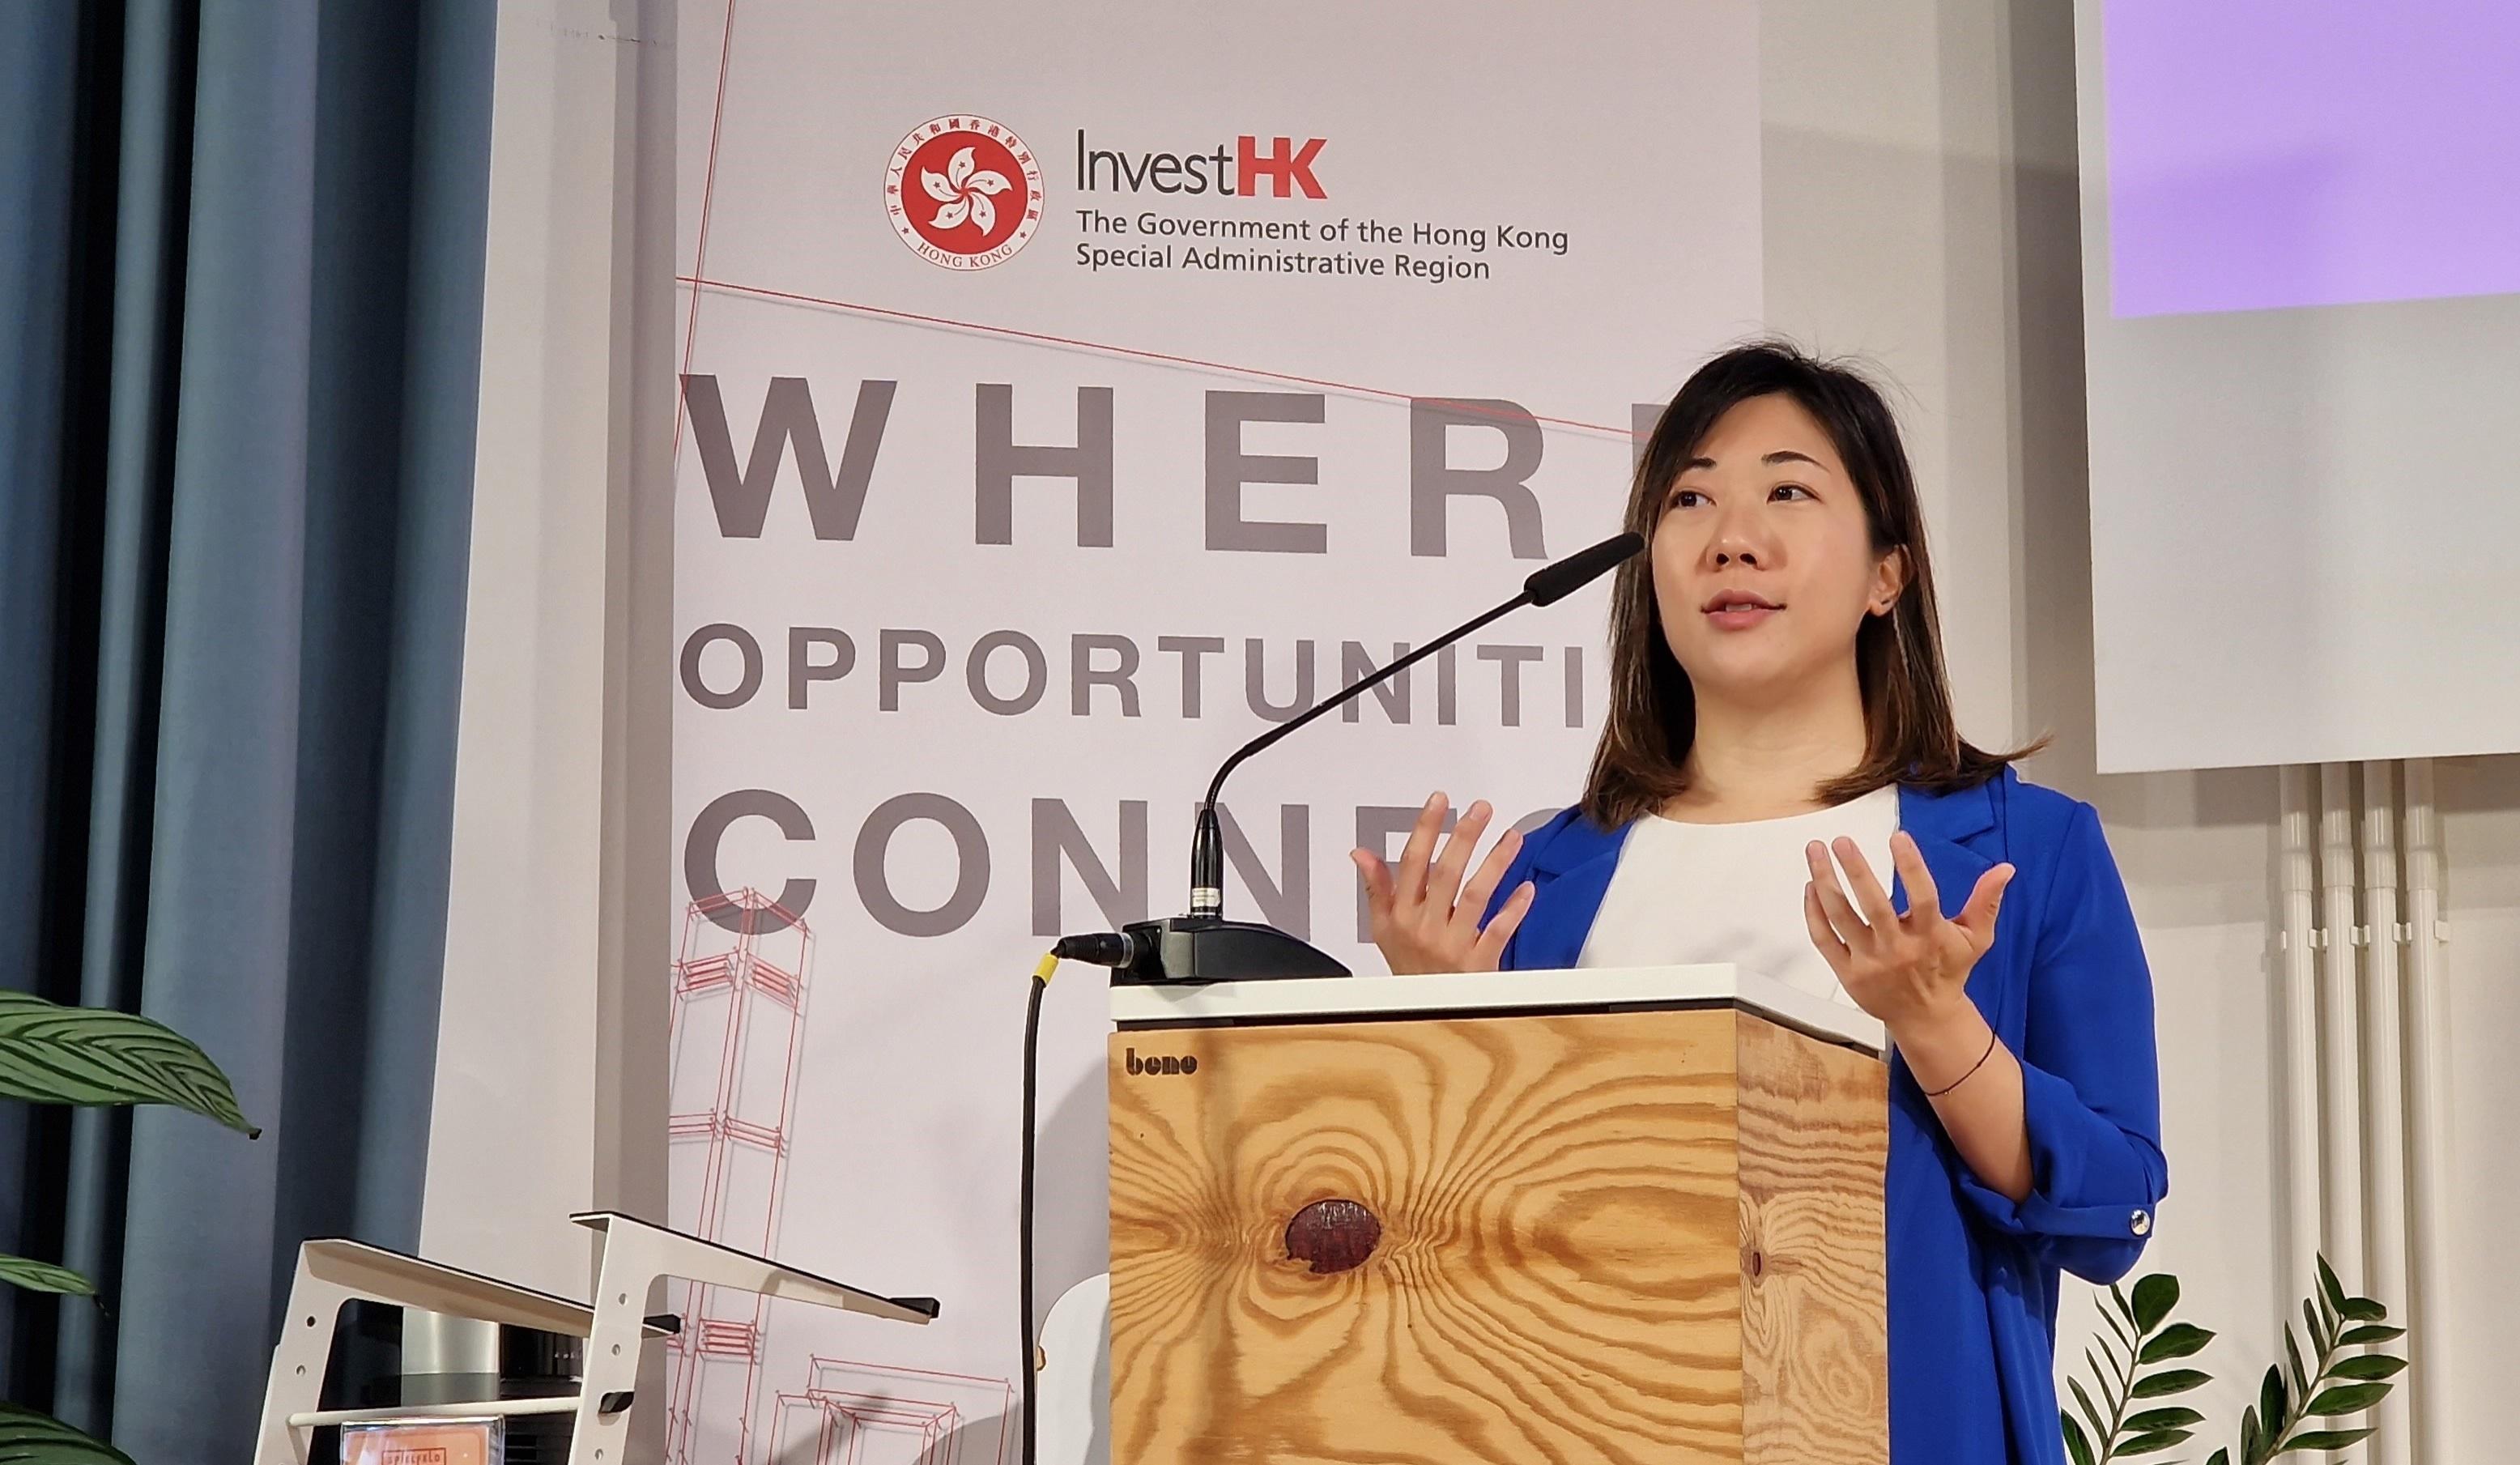 The Director of the Hong Kong Economic and Trade Office, Berlin, Ms Jenny Szeto, speaks at the StartmeupHK Salon in Berlin on August 24 (Berlin time).